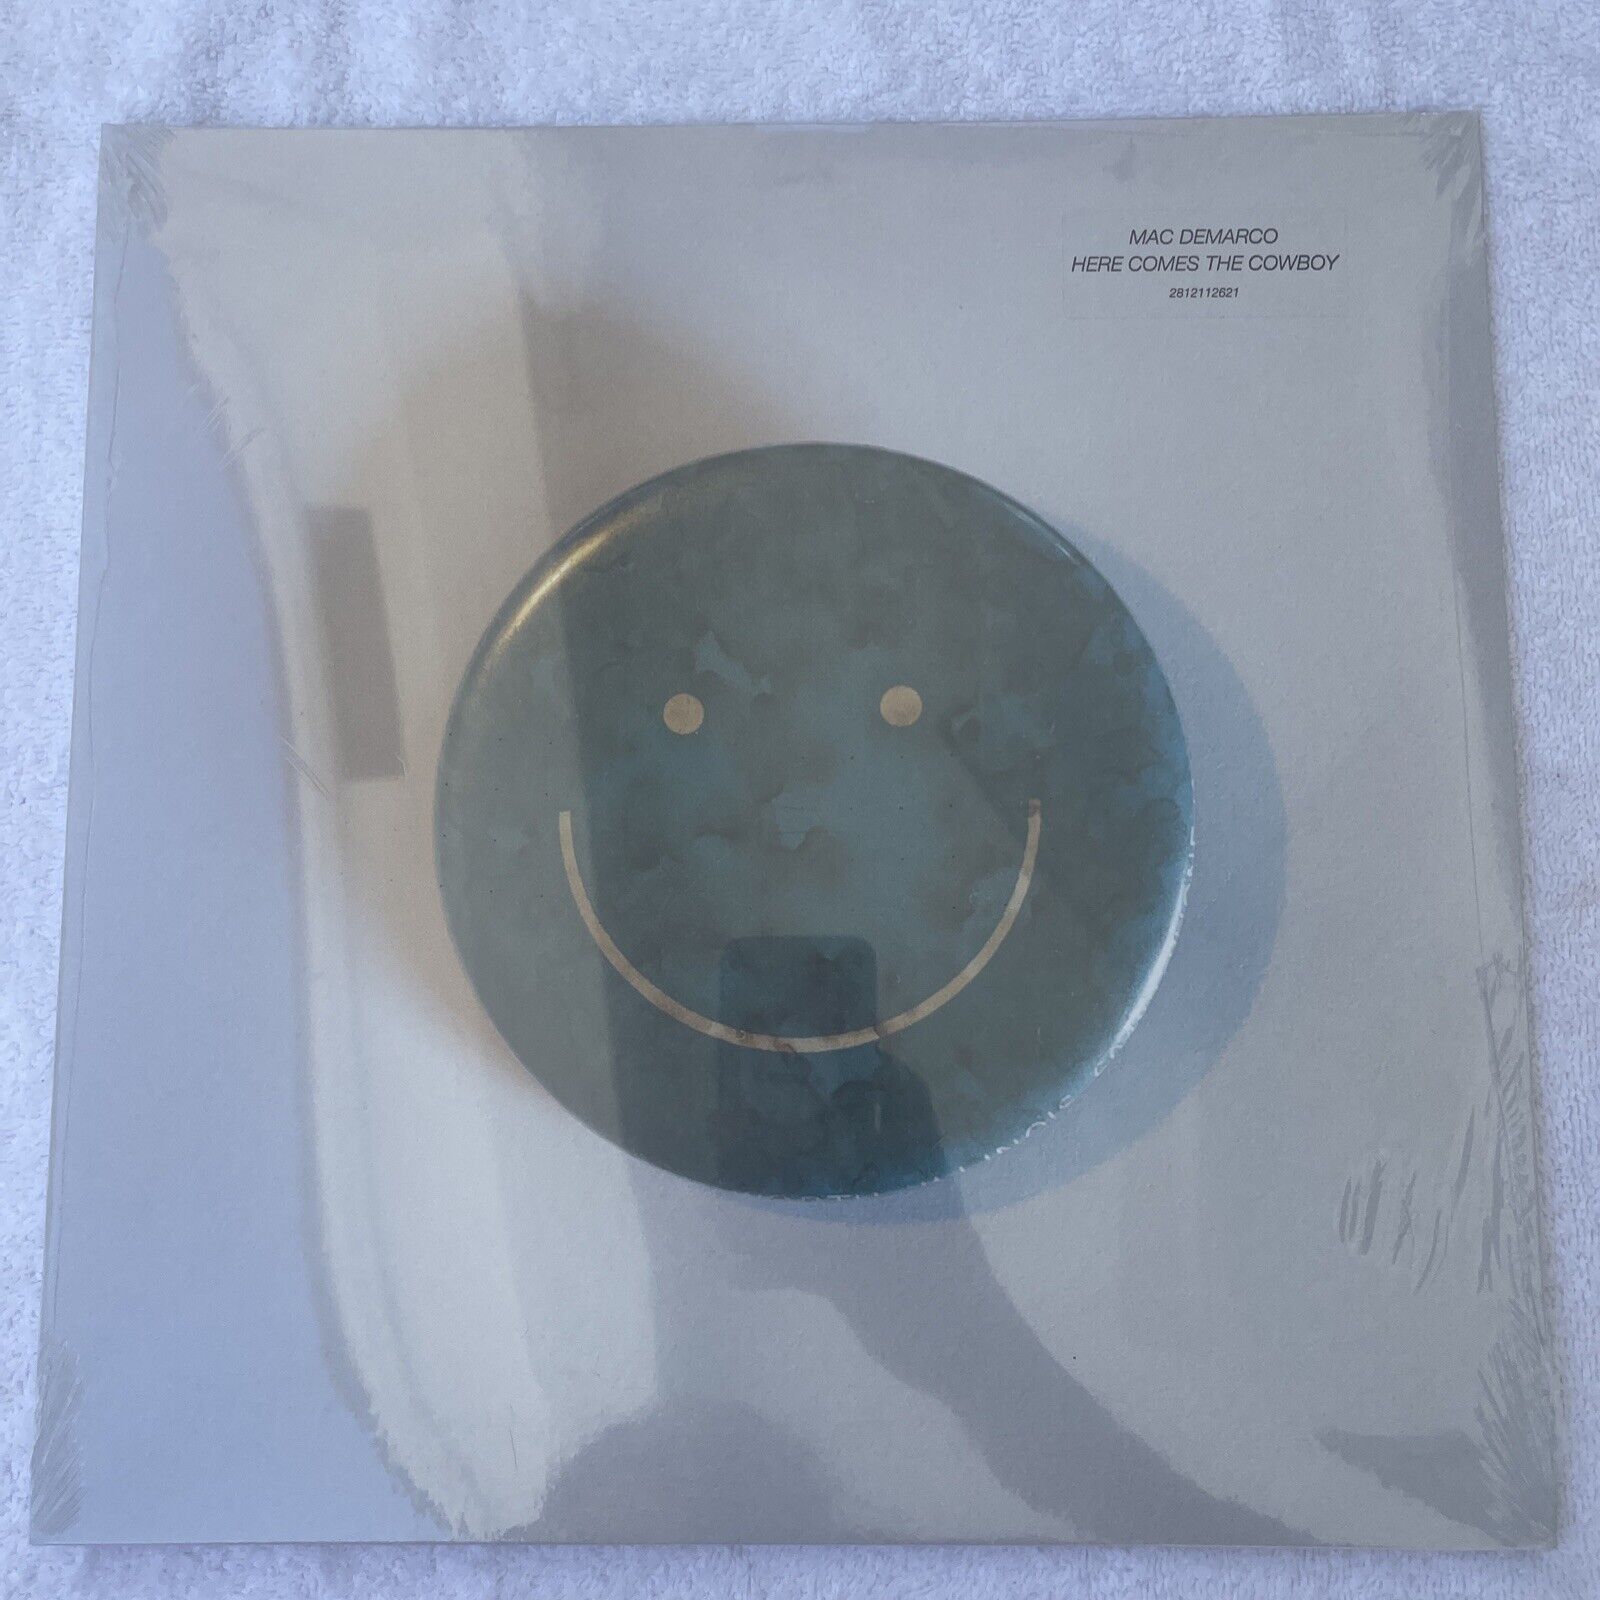 Amazing New Vinyl Here Comes The Cowboy by Demarco, Mac (Record, 2019)